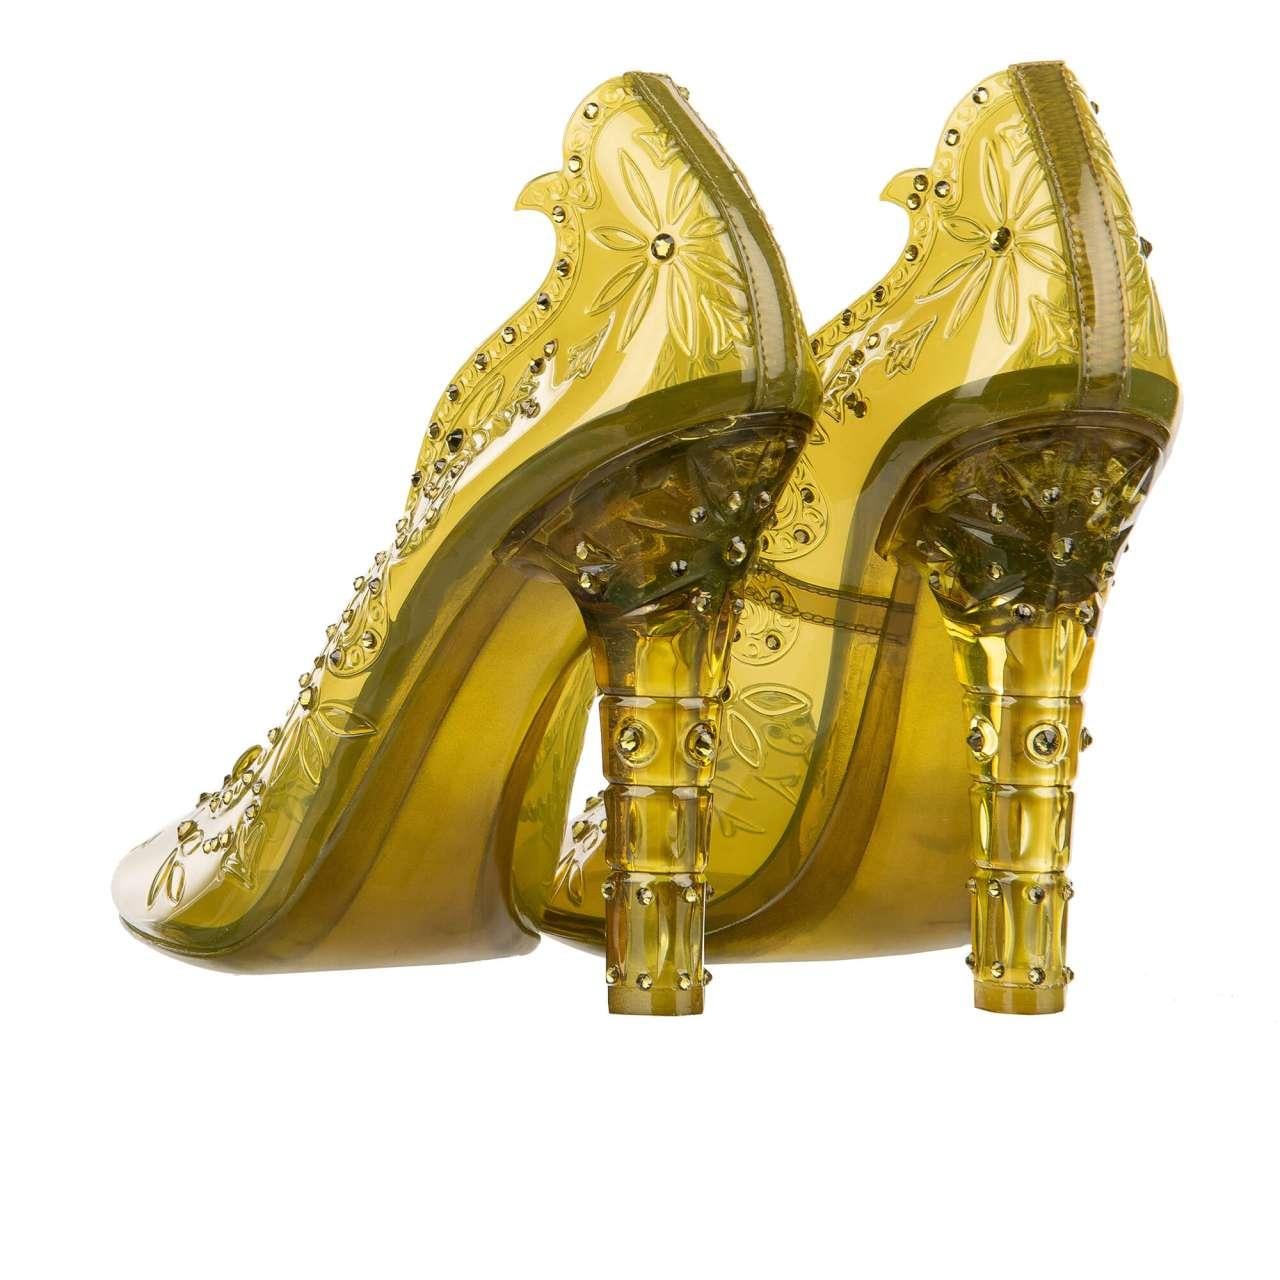 - Cinderella transparent Pumps made of PVC embellished with rhinestones in green by DOLCE & GABBANA  - RUNWAY - Dolce&Gabbana Fashion Show - Former RRP: EUR 1.150 - MADE IN ITALY - New with Box - Rhinestones embellishments - Model: